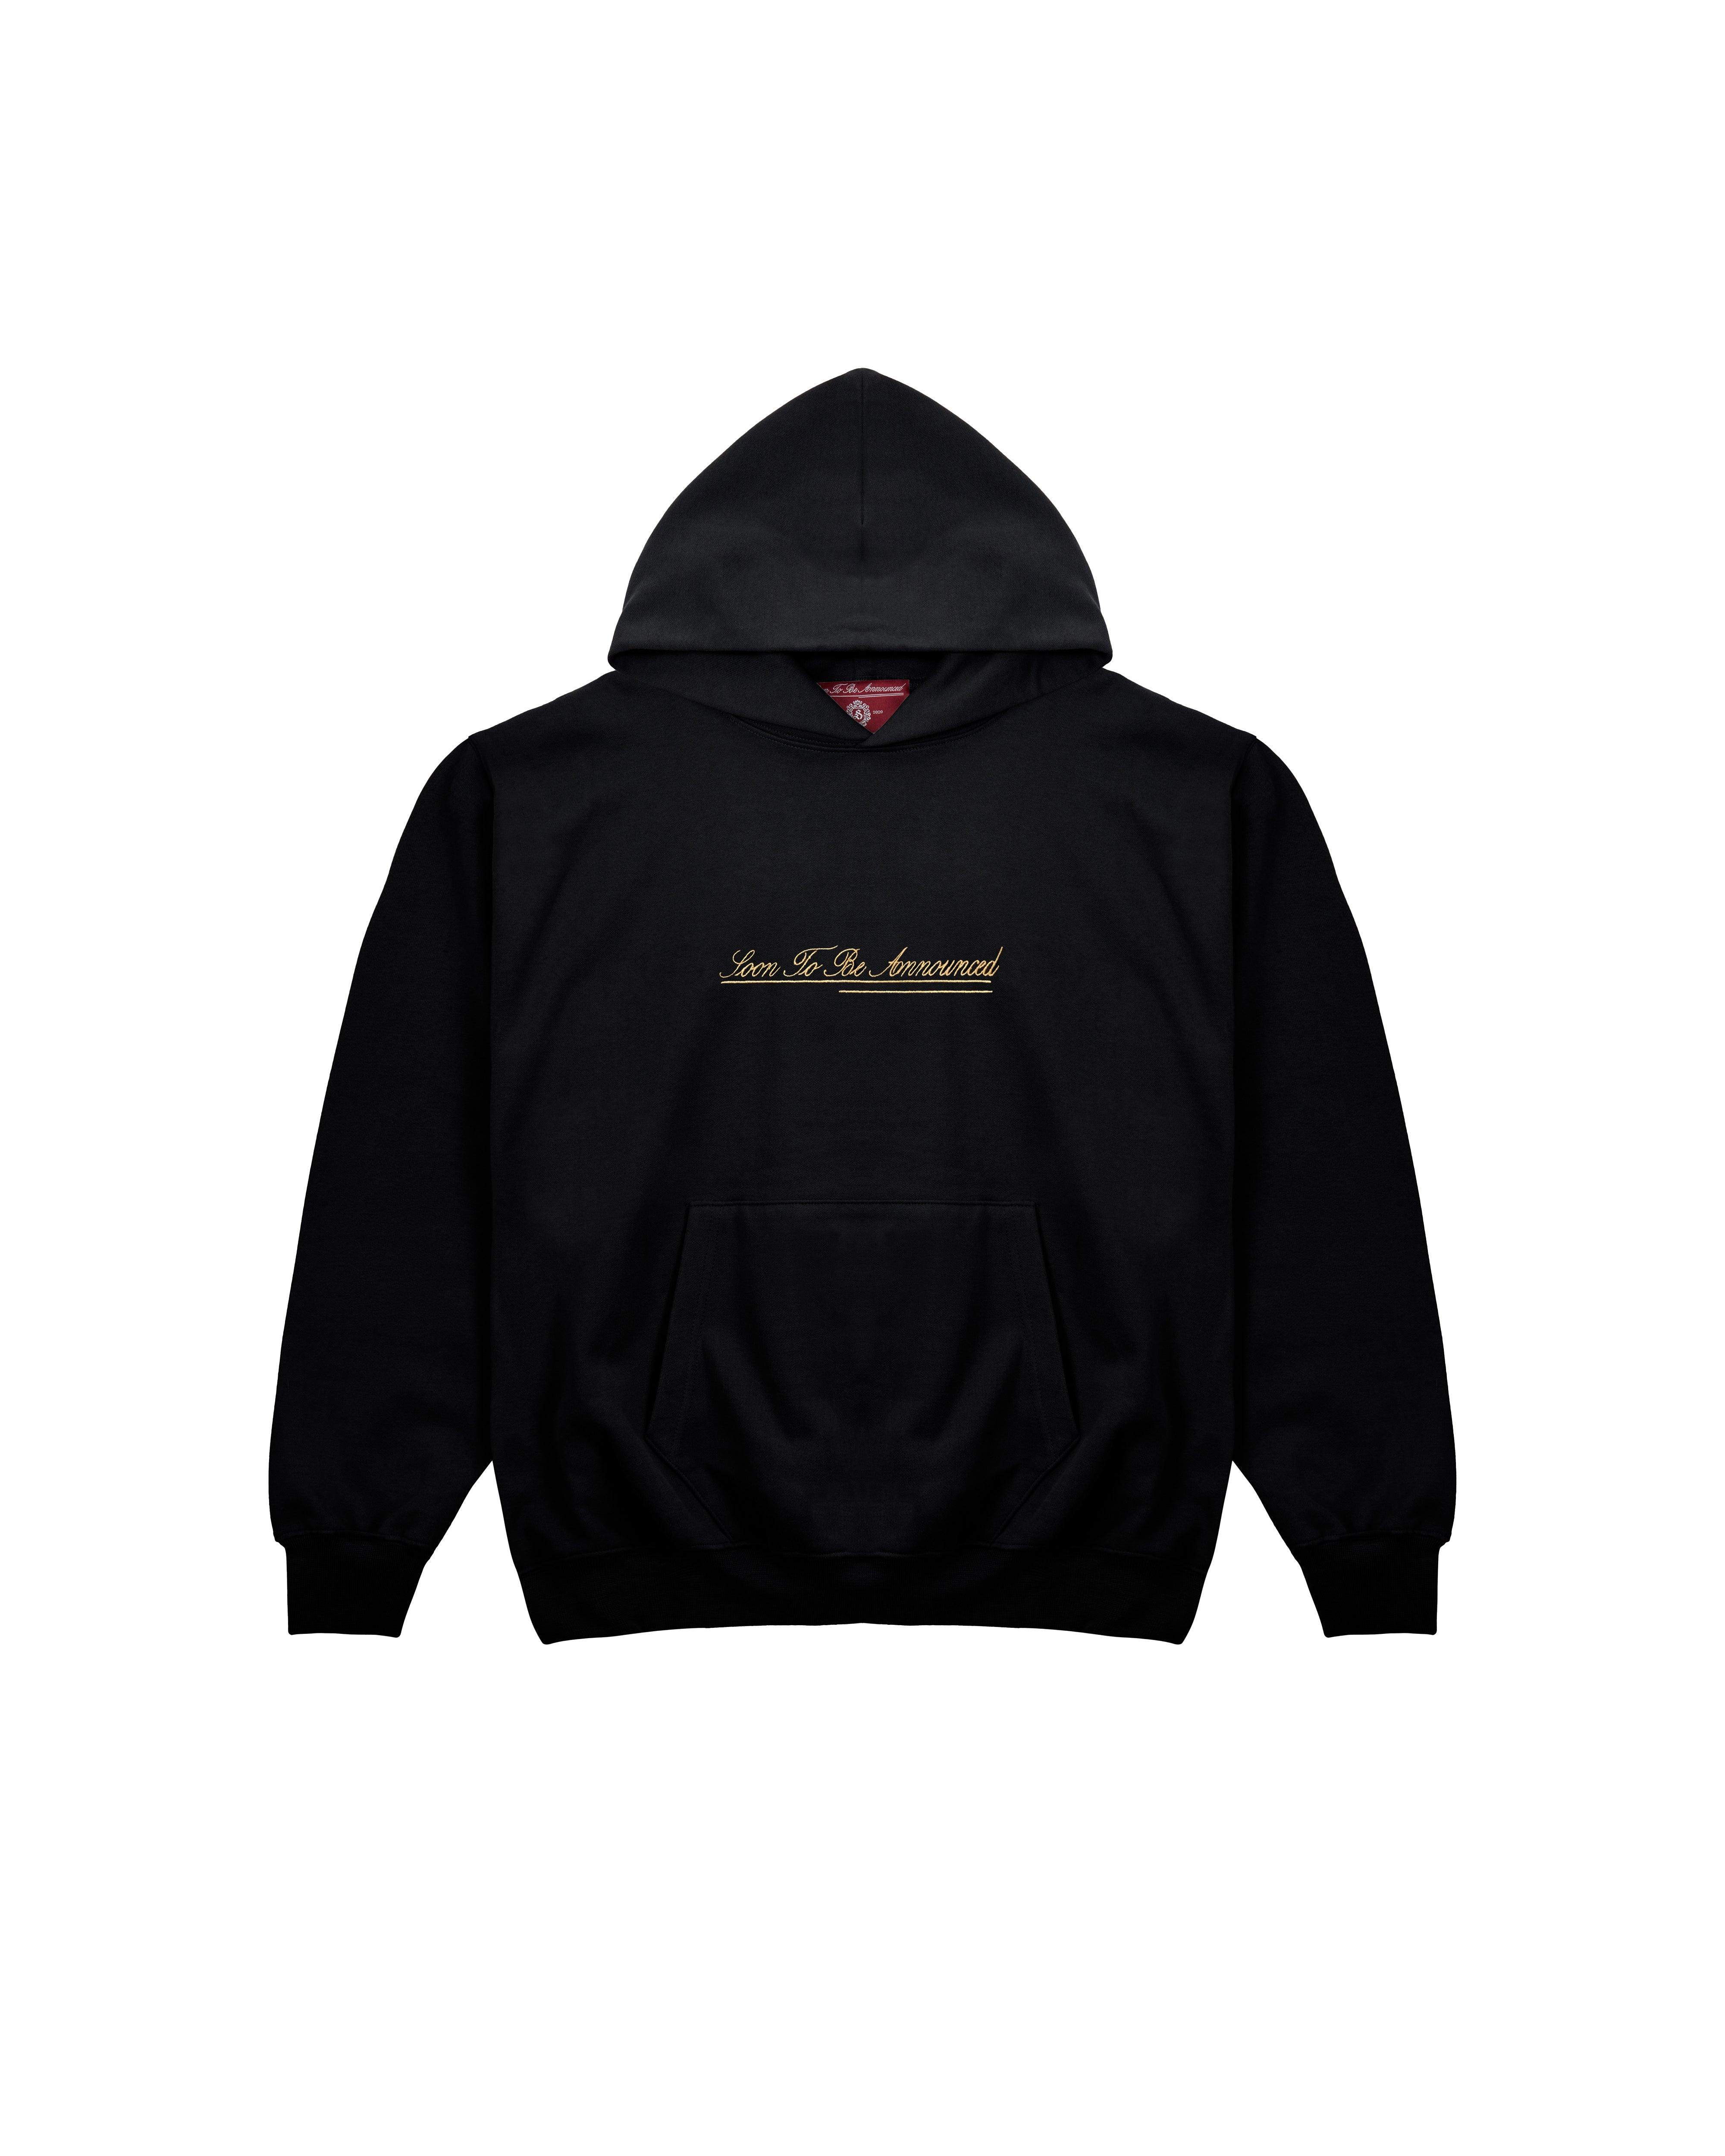 STBA Embroidery Hoodie - SOON TO BE ANNOUNCED